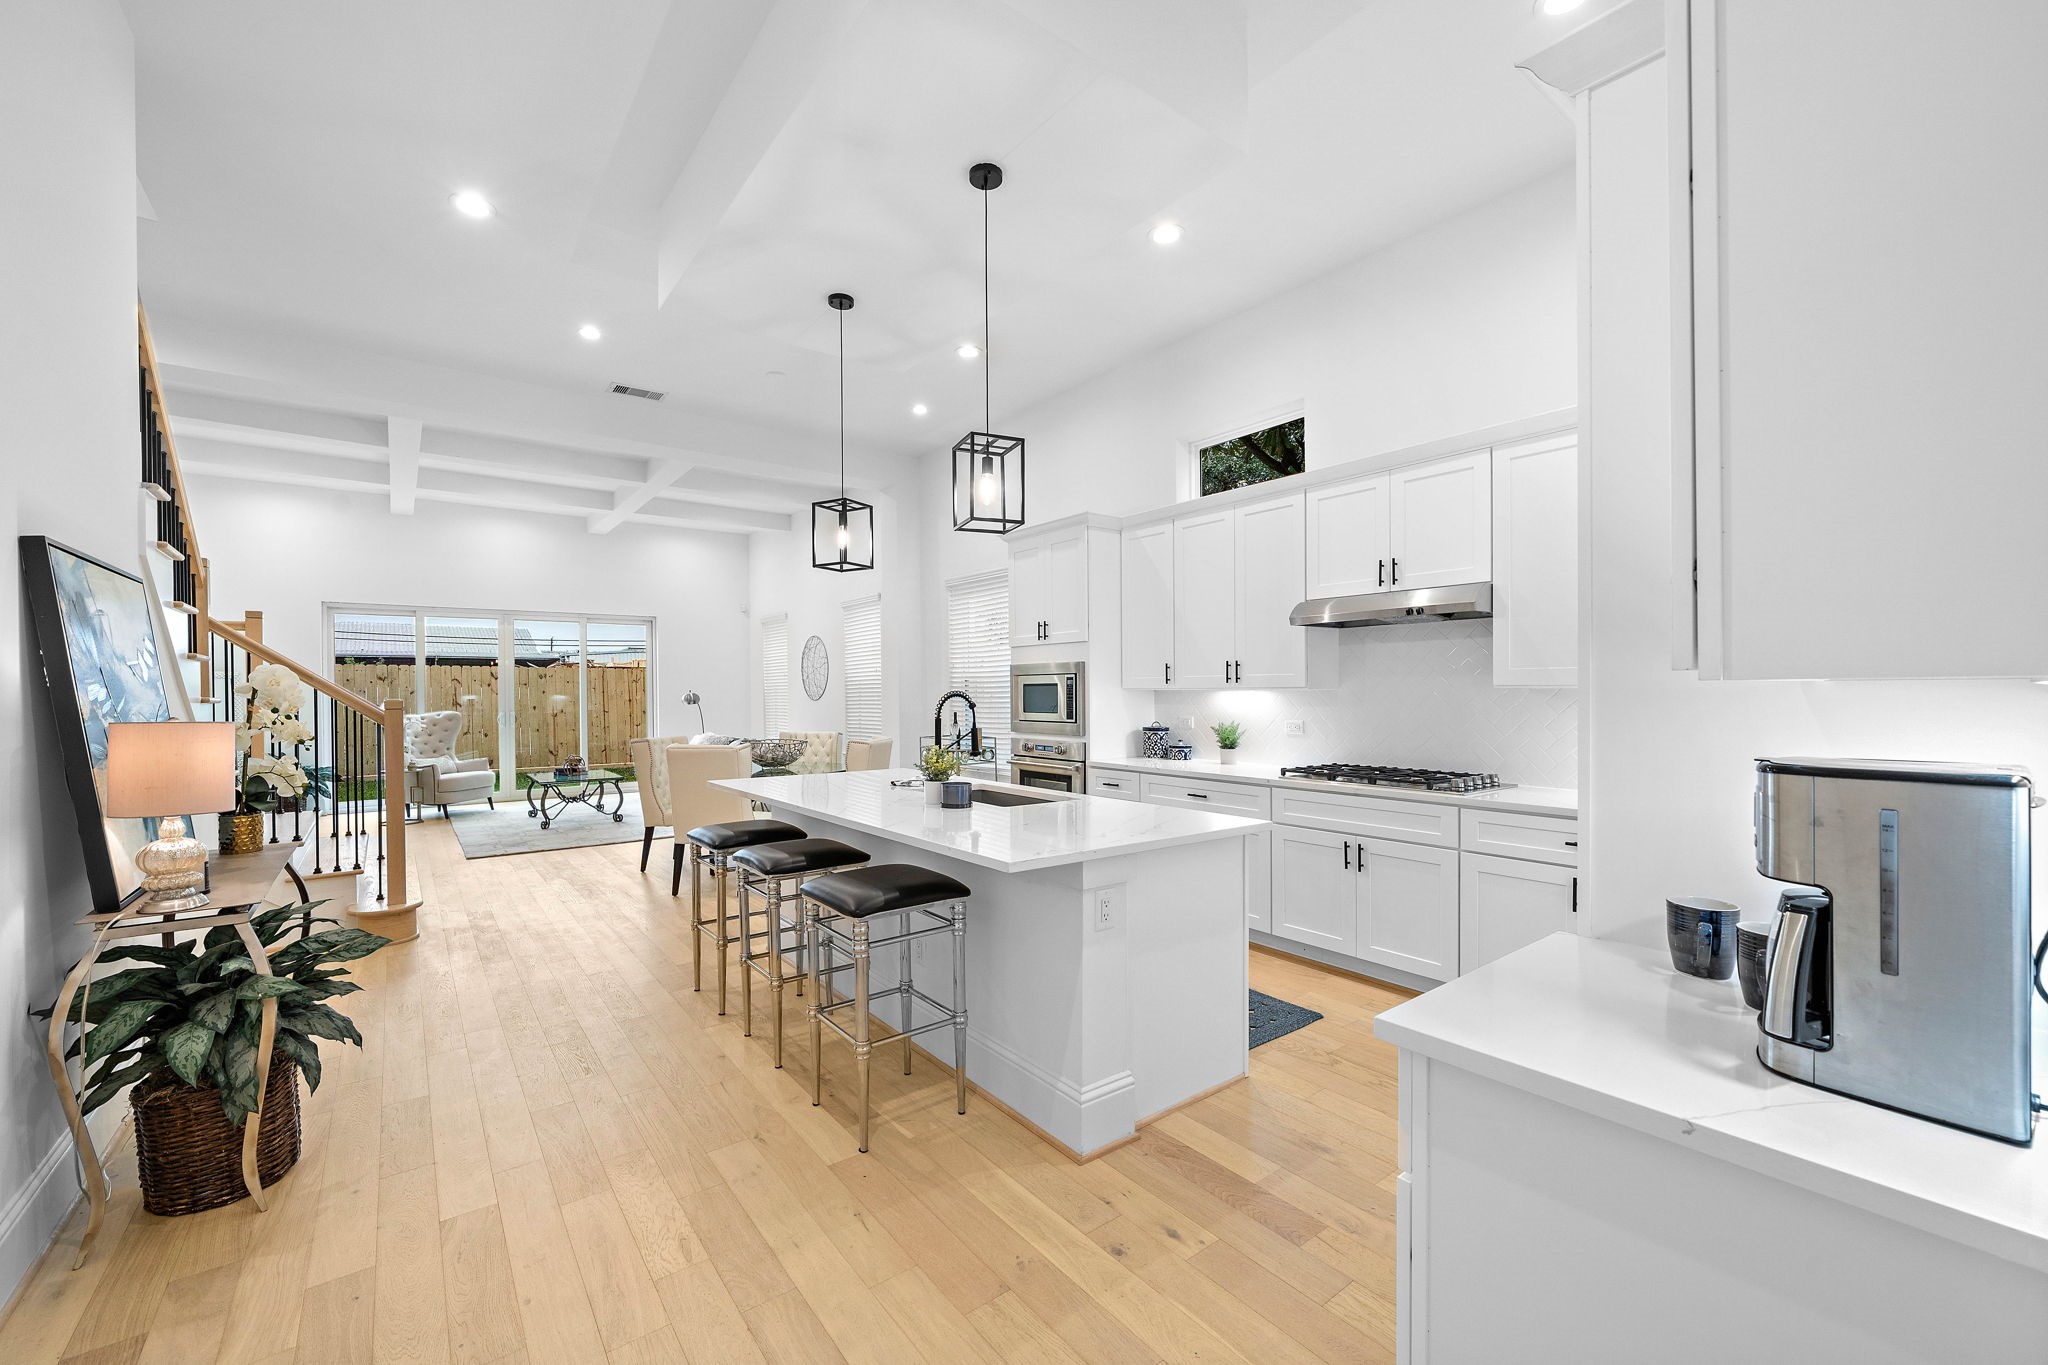 As you enter, you will notice spacious open concept living with amazing natural light and quality finishes throughout. (Photo is of a completed home, finishes are subject to change.)